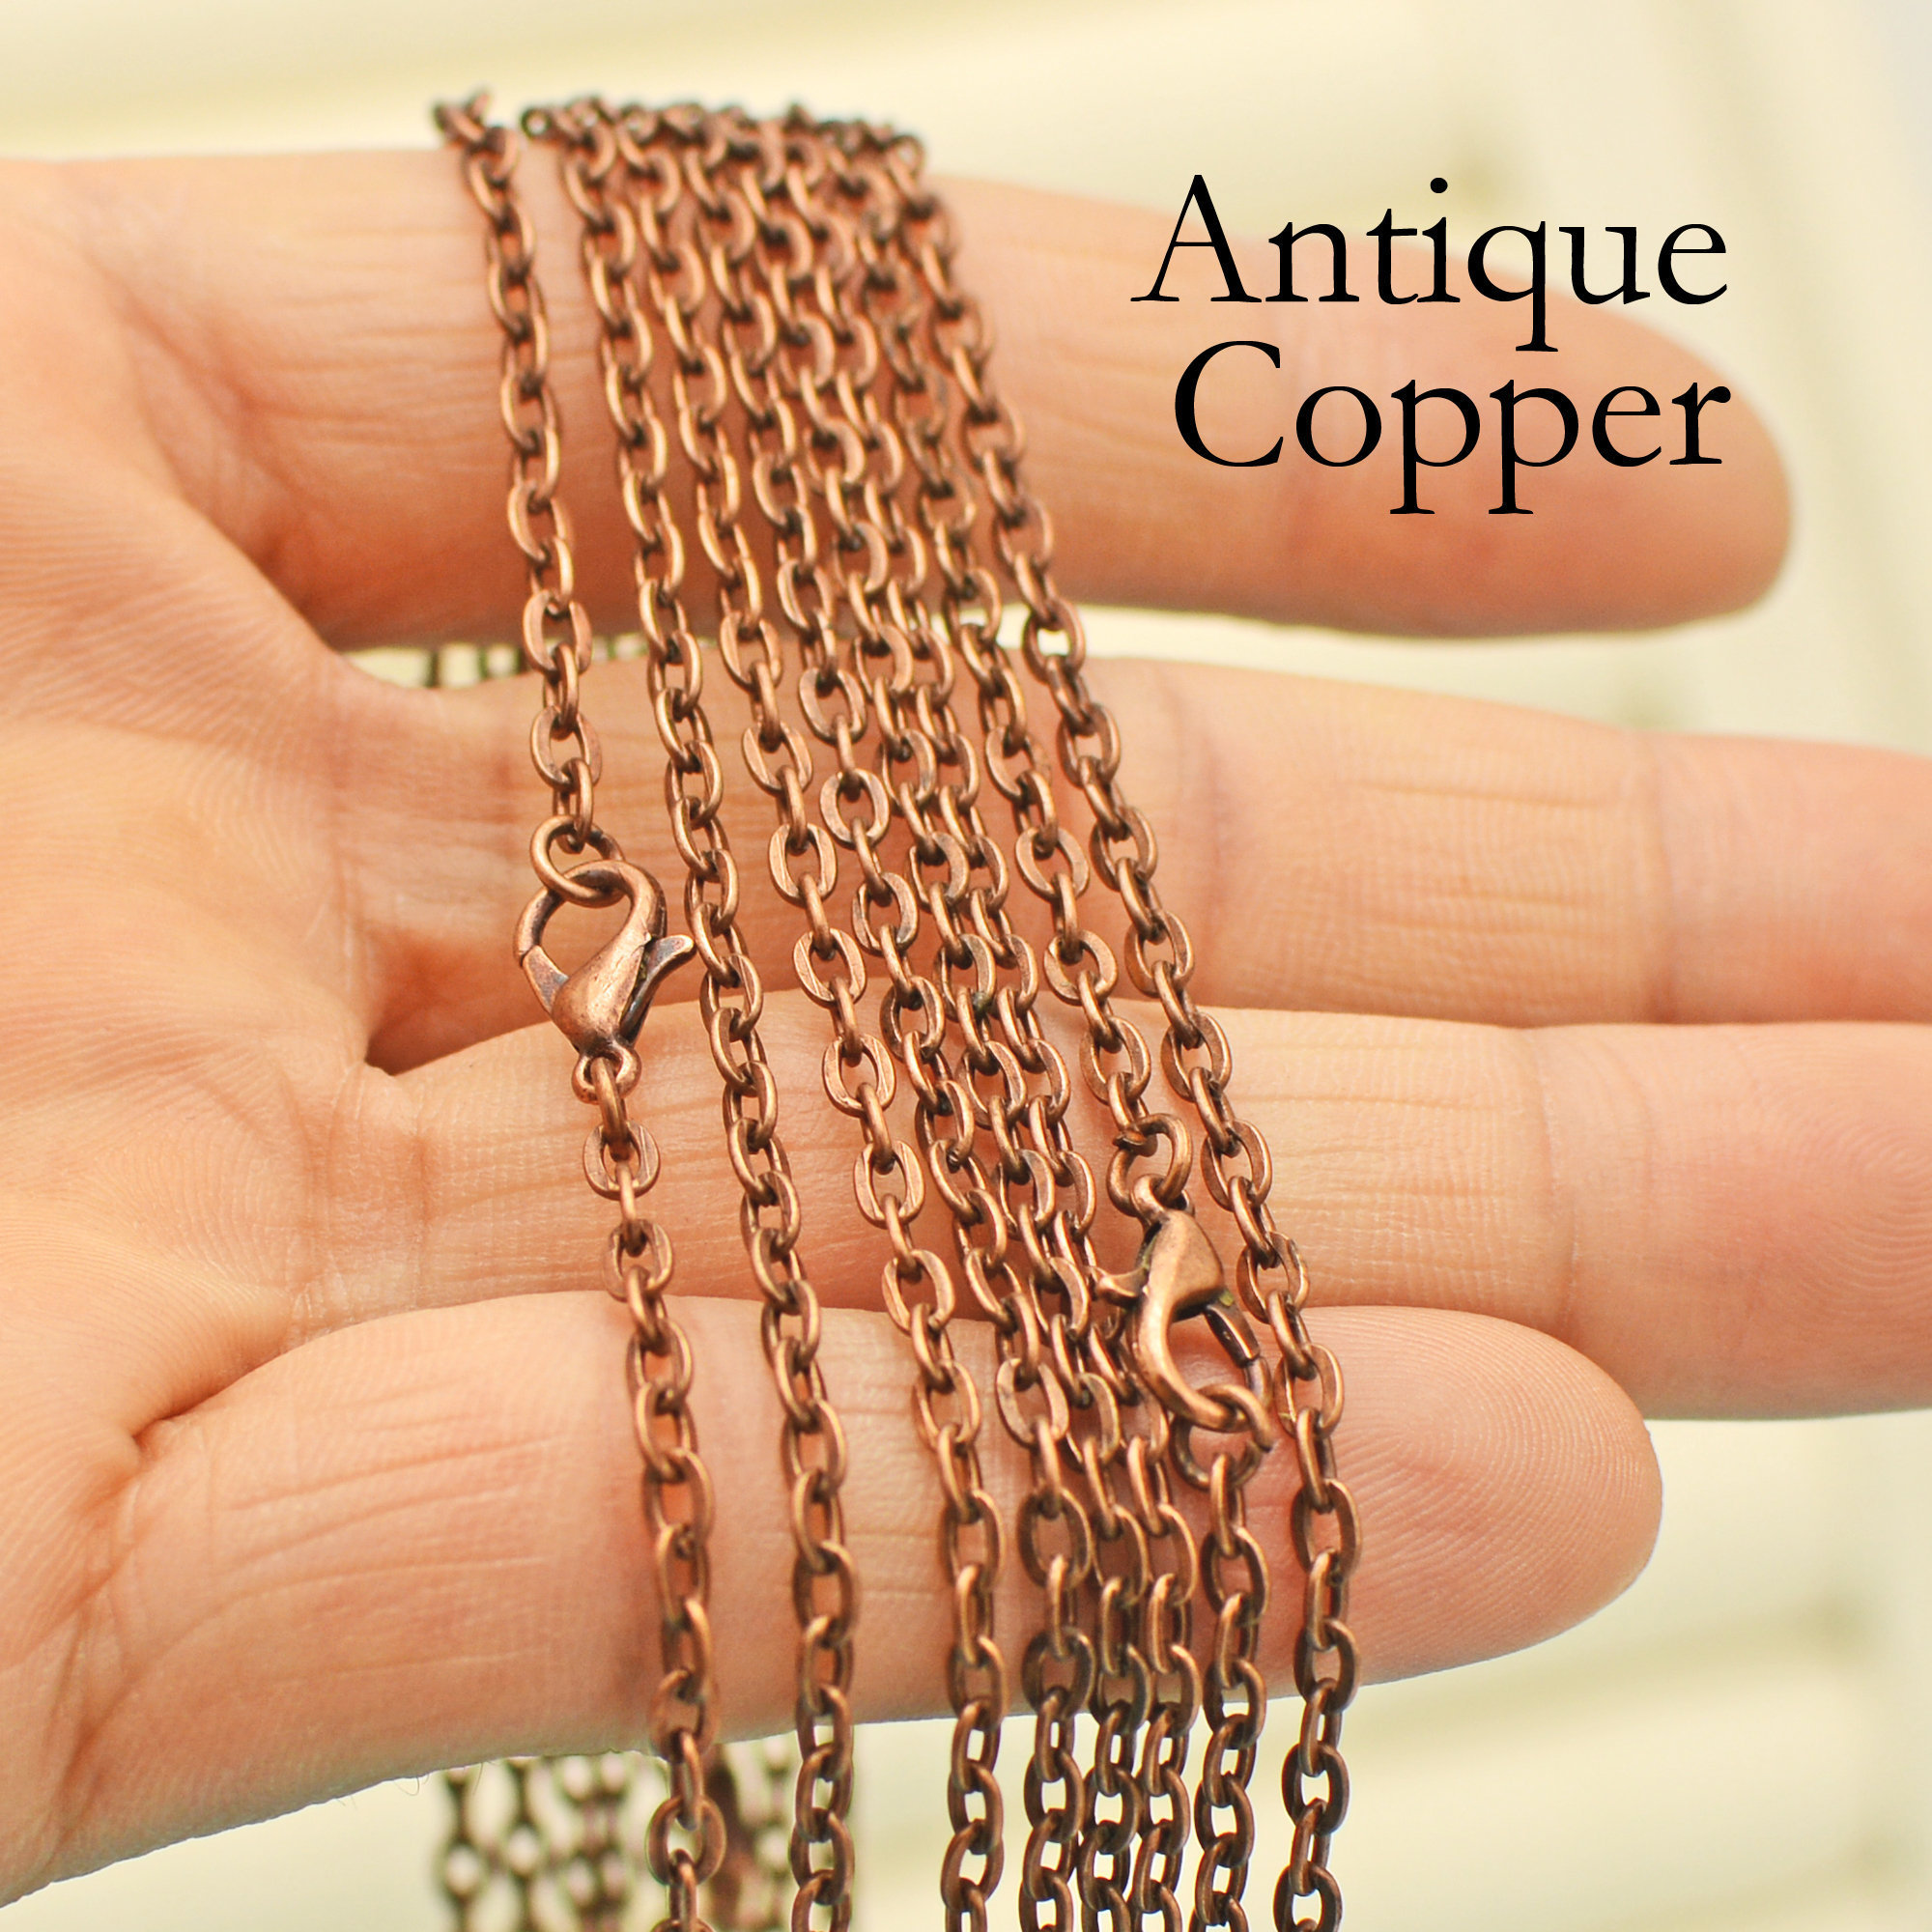 Solid Copper Necklace Chains Bead Chain Necklace Set NC22 Fine Copper 2.4  mm Ball Chain Necklace Chains 24 Inch Chain Bulk Lot of 10